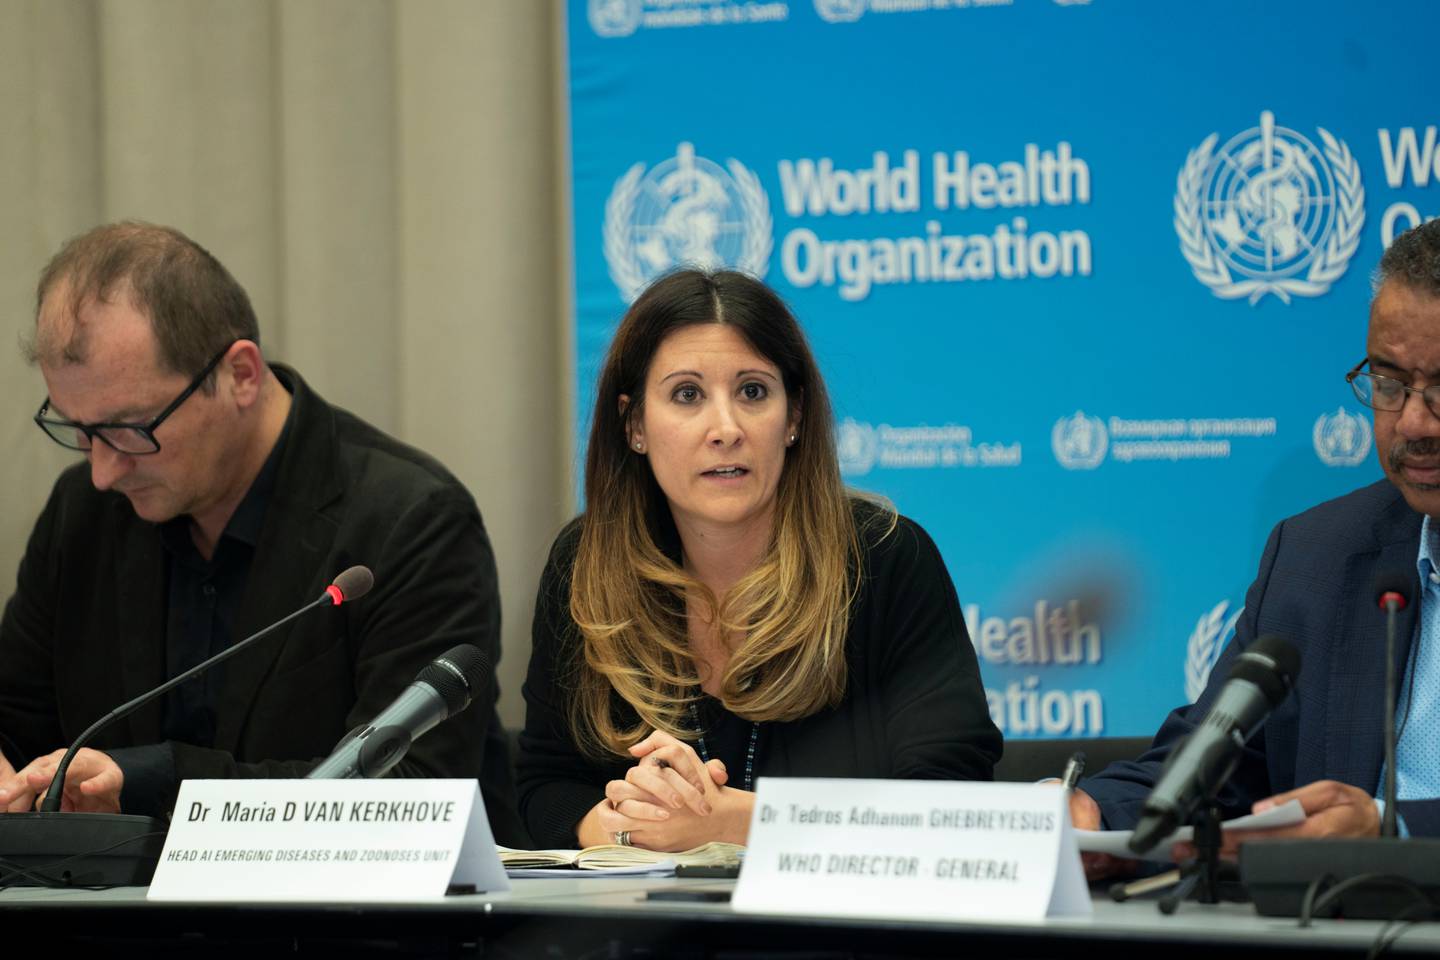 Dr Maria D Van Kerkhove, Head AI Emerging Diseases and Zoonoses Unit at WHO speaks during a news conference following the second meeting of the International Health Regulations (IHR) Emergency Committee for Pneumonia due to the Novel Coronavirus 2019-nCoV in Geneva, Switzerland January 23, 2020. Christopher Black/WHO/Handout via REUTERS ATTENTION EDITORS - THIS IMAGE WAS PROVIDED BY A THIRD PARTY